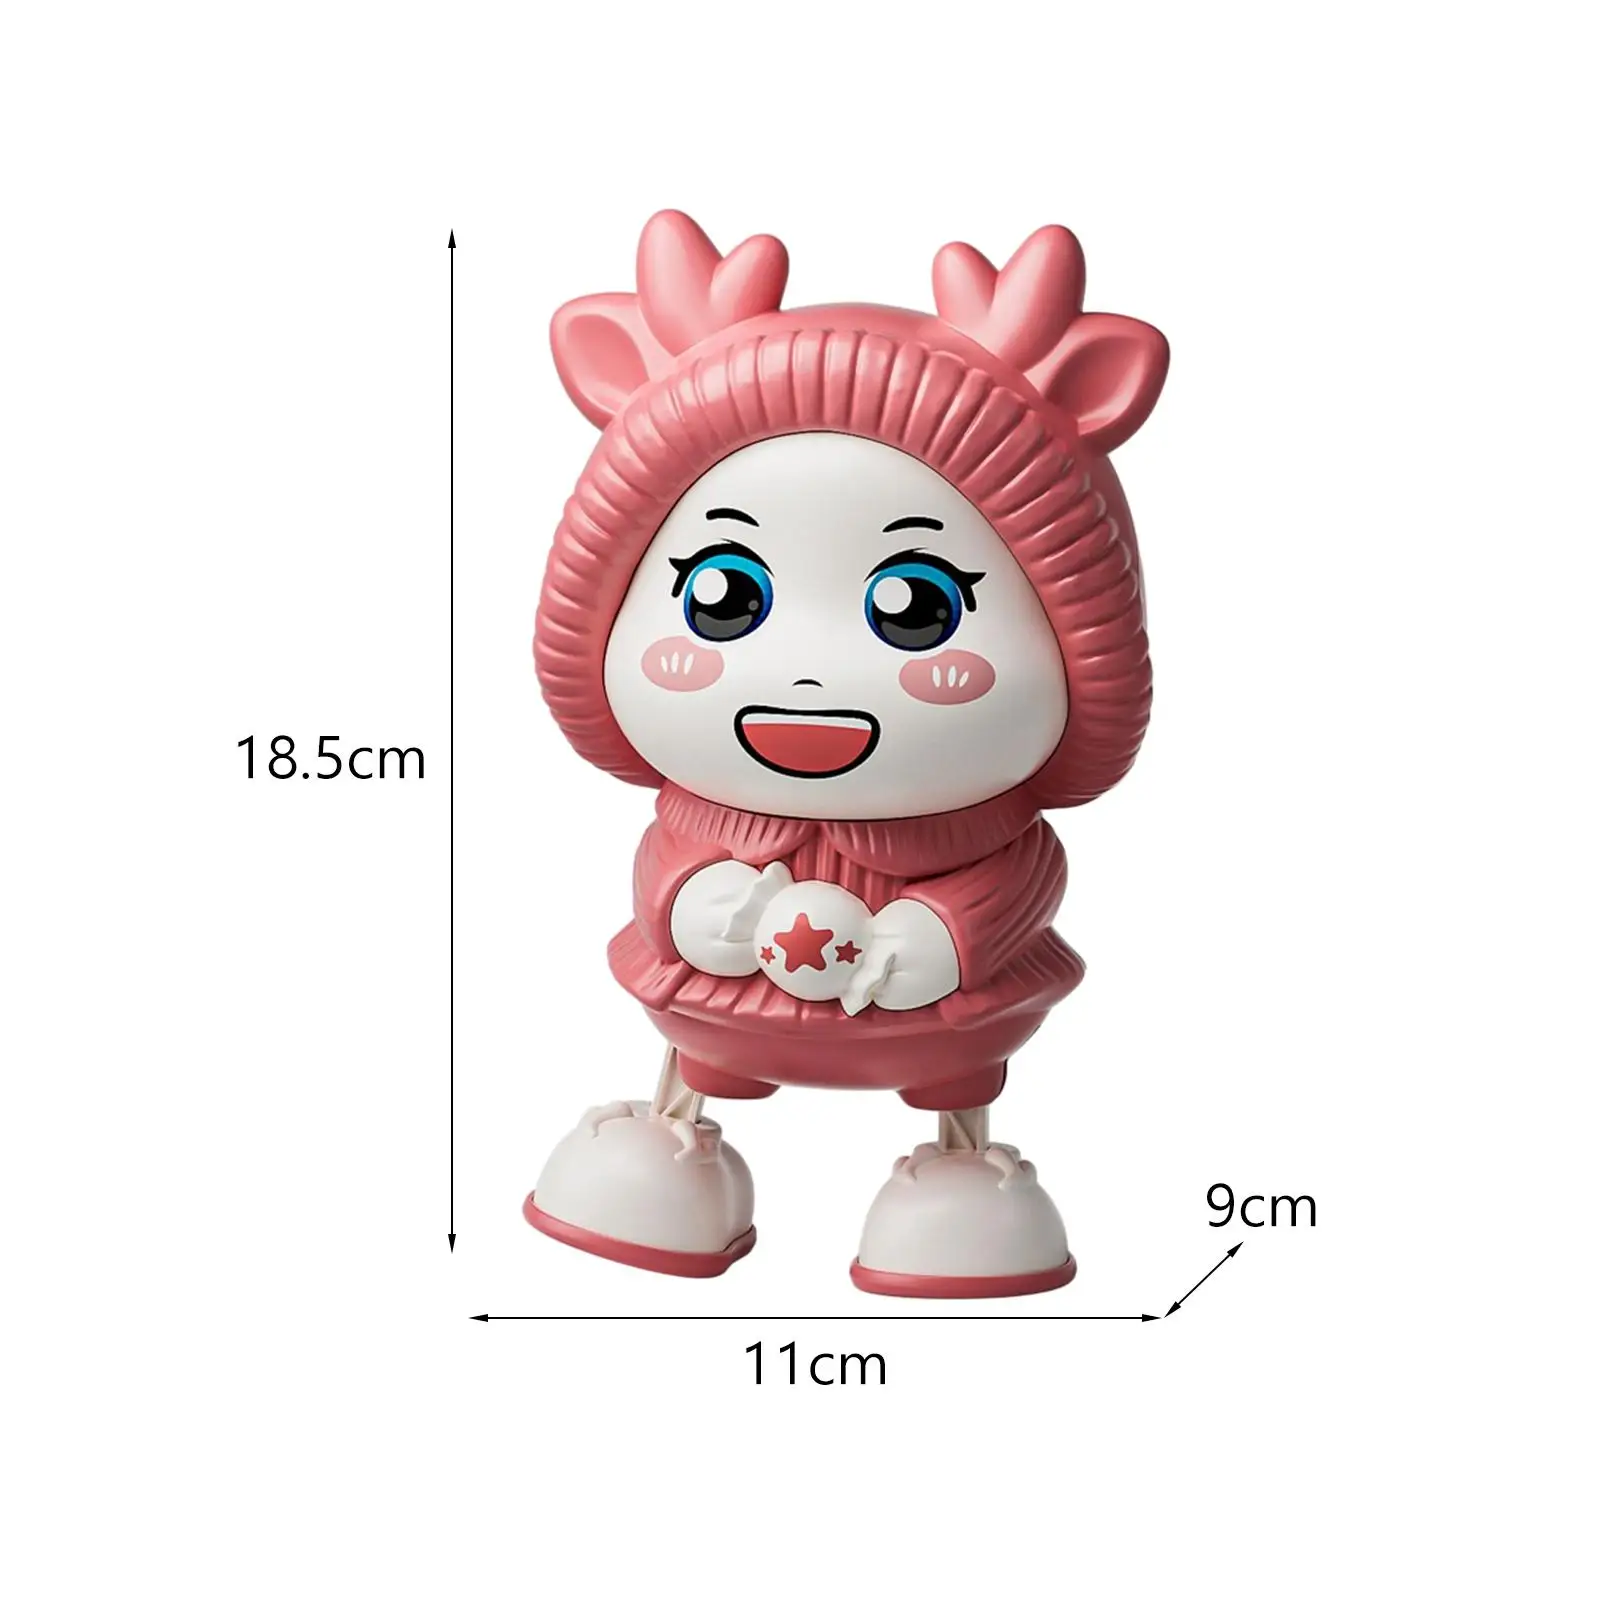 Light up Toy Easy to Use Attractive Decoration Dancing Walking Toy Singing Toy for Kids Babies Toddlers Children Accessories